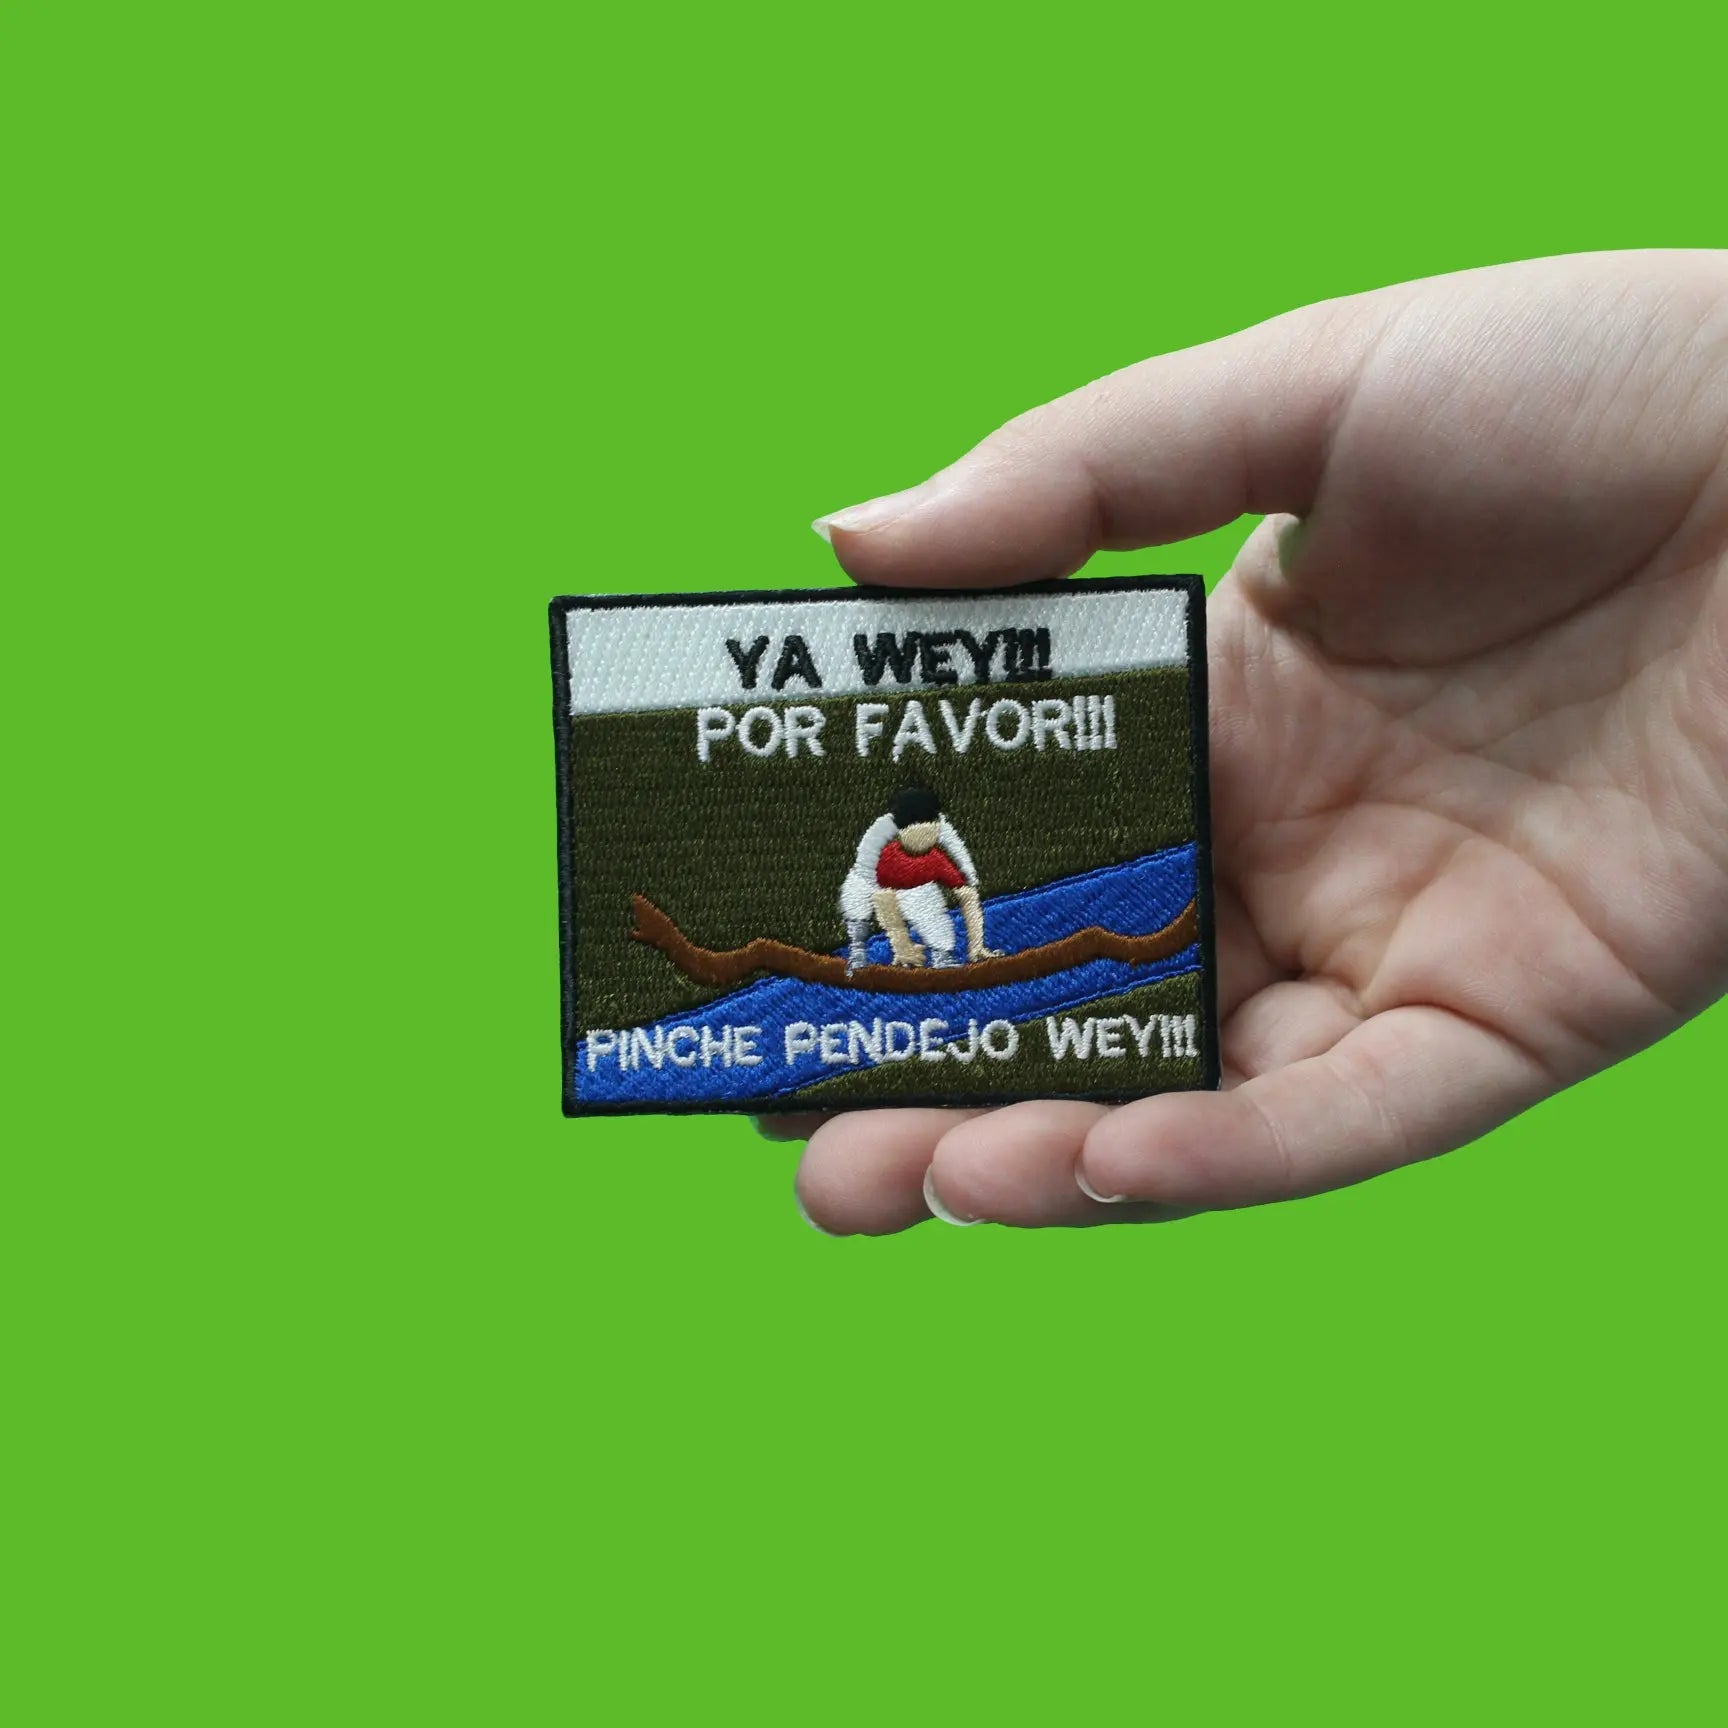 Ya Wey Por Favor Funny Hispanic Expression Embroidered Iron On Patch 